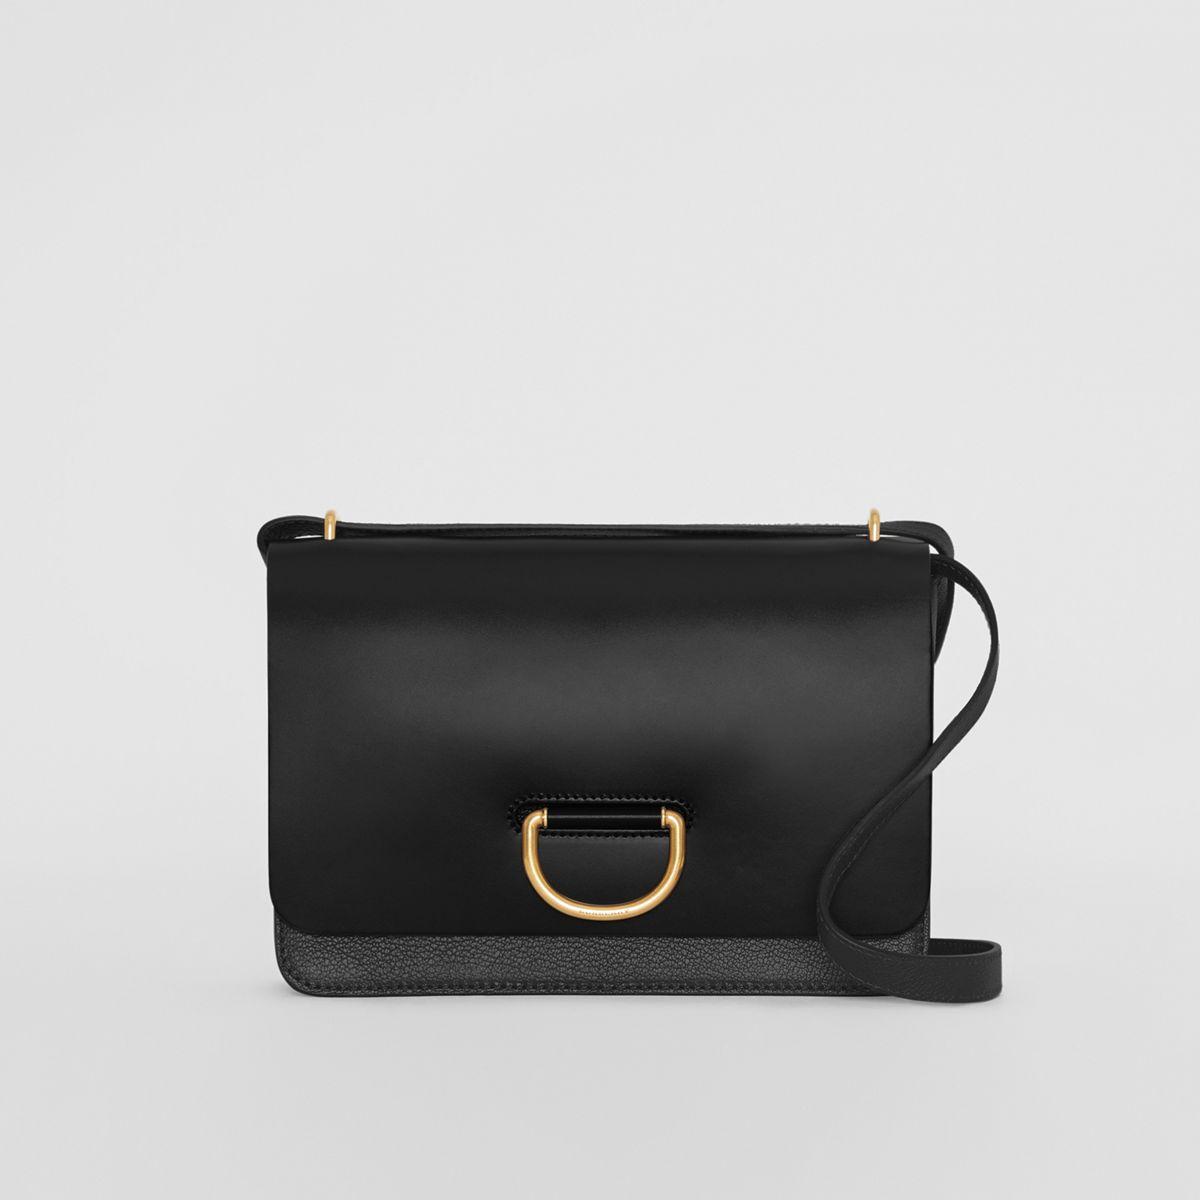 Burberry The Medium Leather D-ring Bag in Black | Lyst